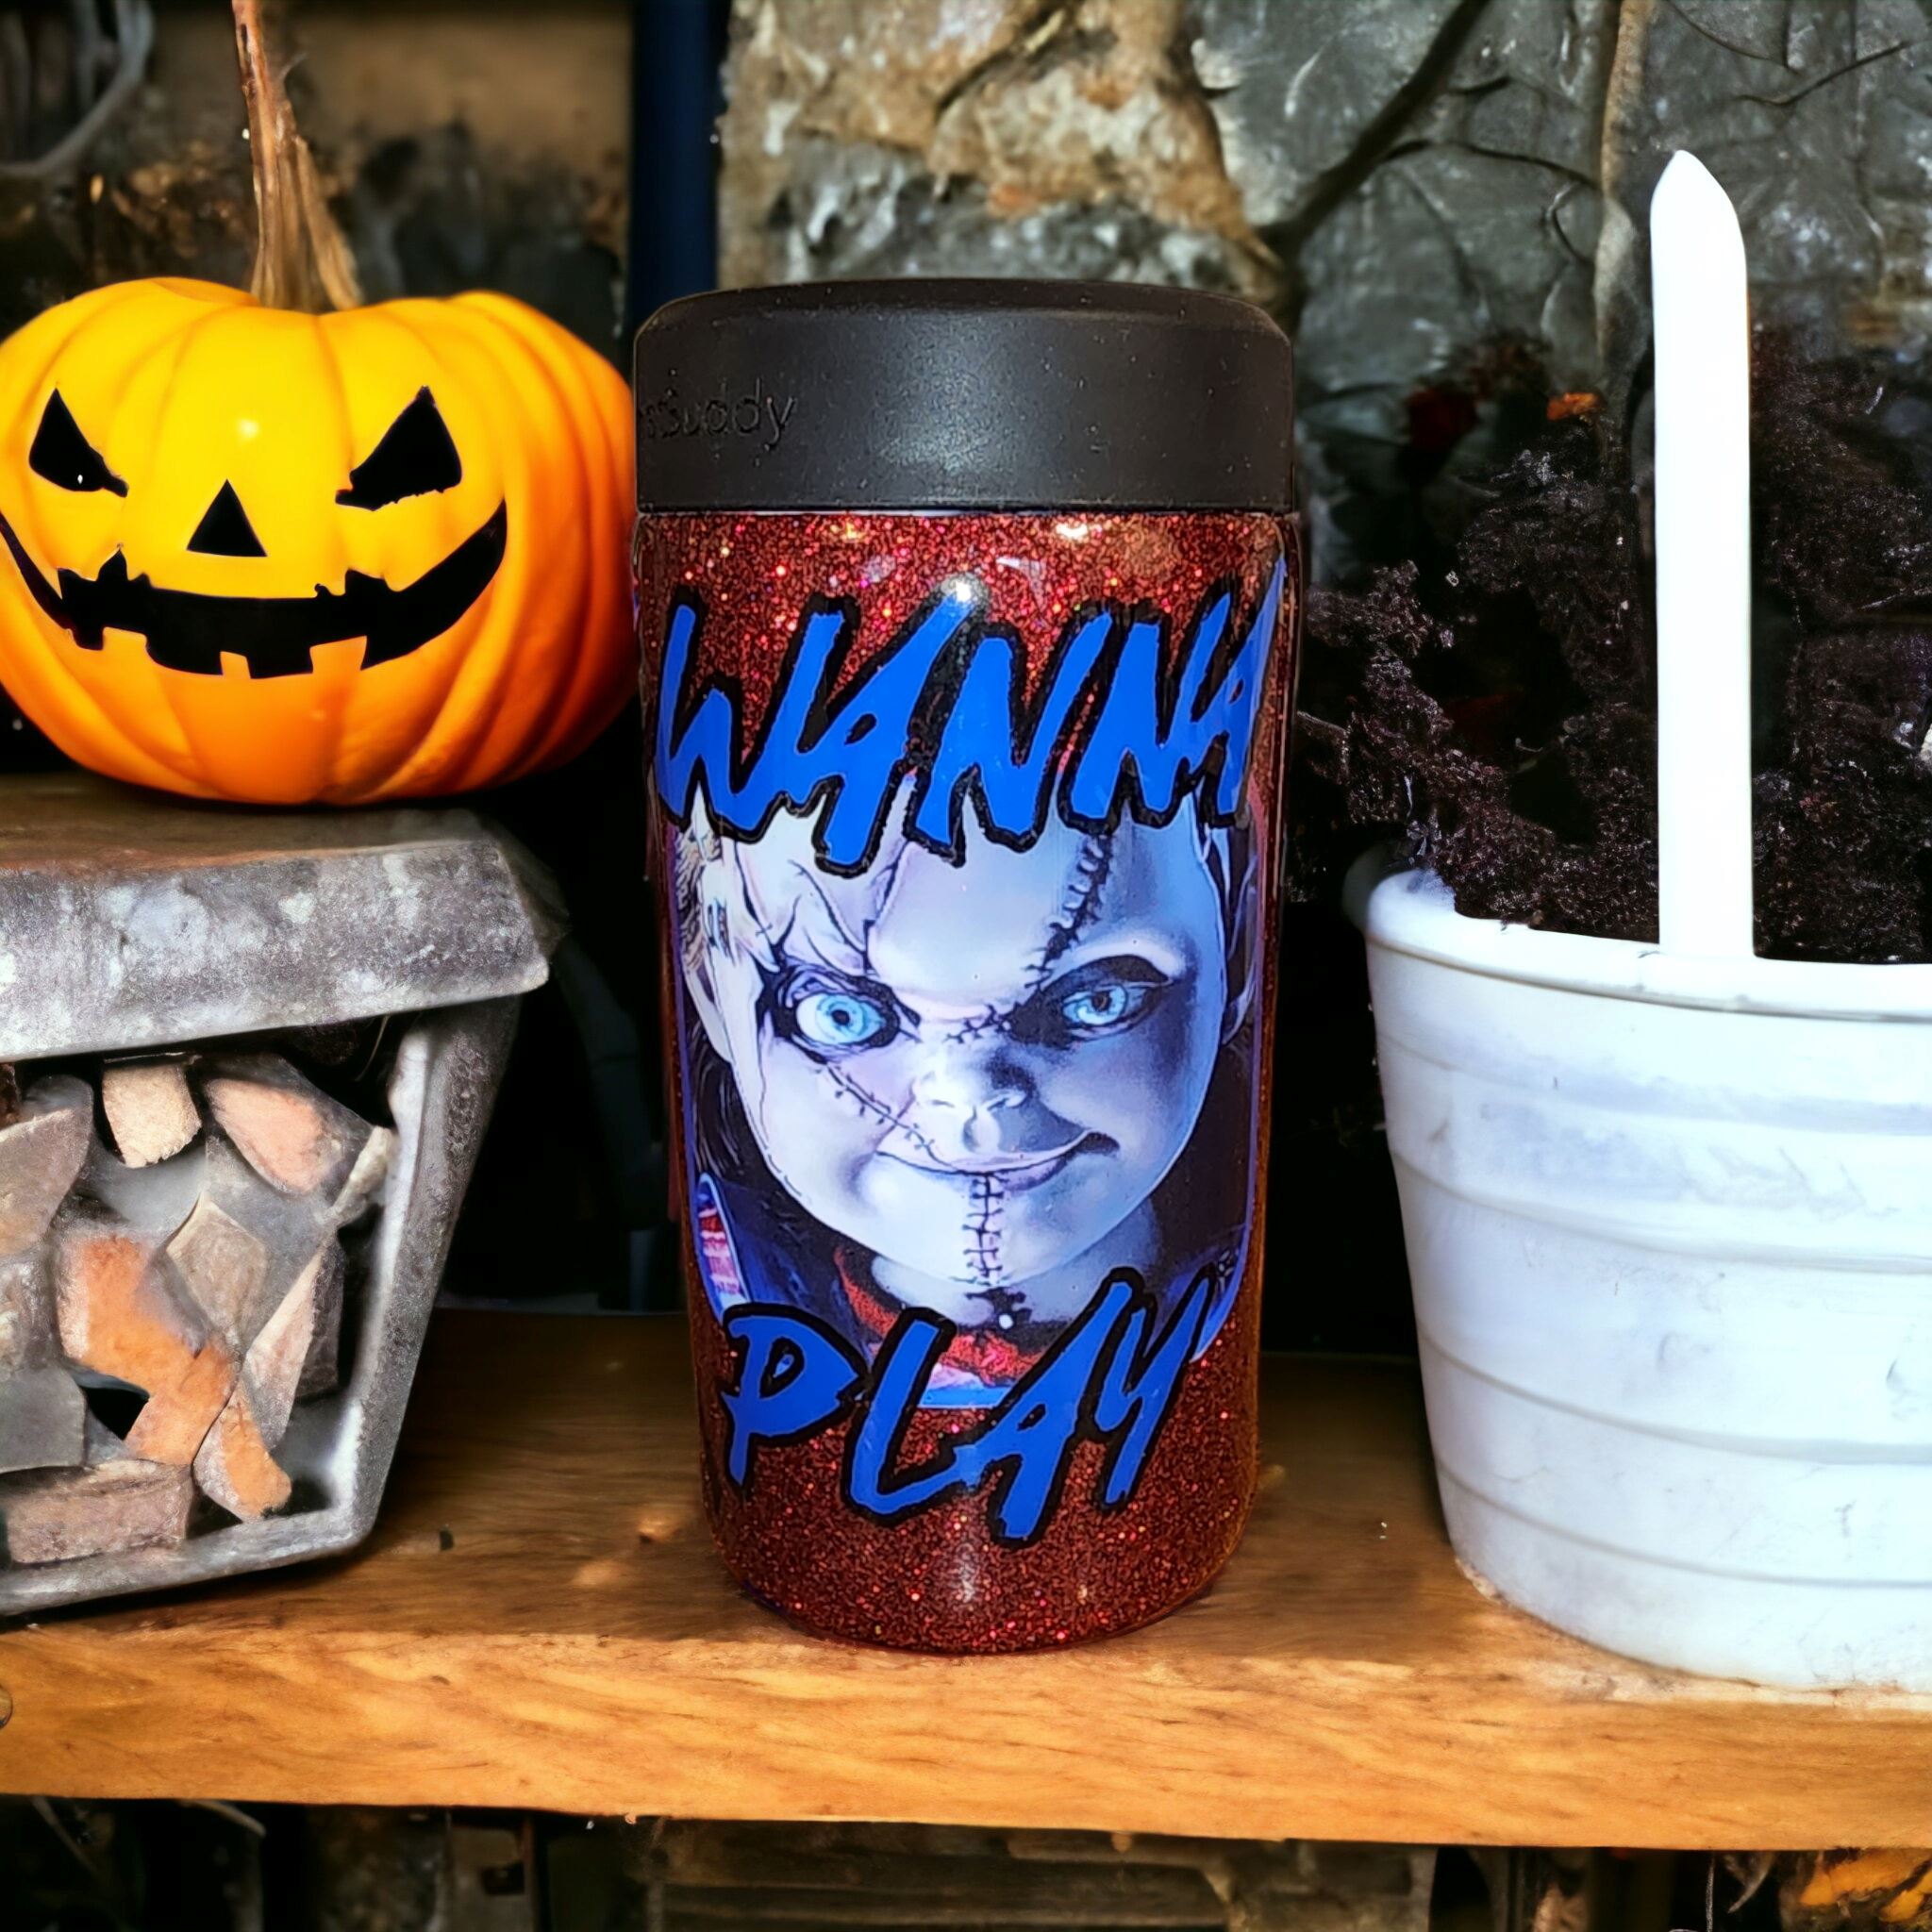 https://cdn.shopify.com/s/files/1/0659/8390/6035/products/rare-chucky-halloween-frost-buddy-universal-can-cooler-gravesfamilycreations-420493.jpg?v=1693160240